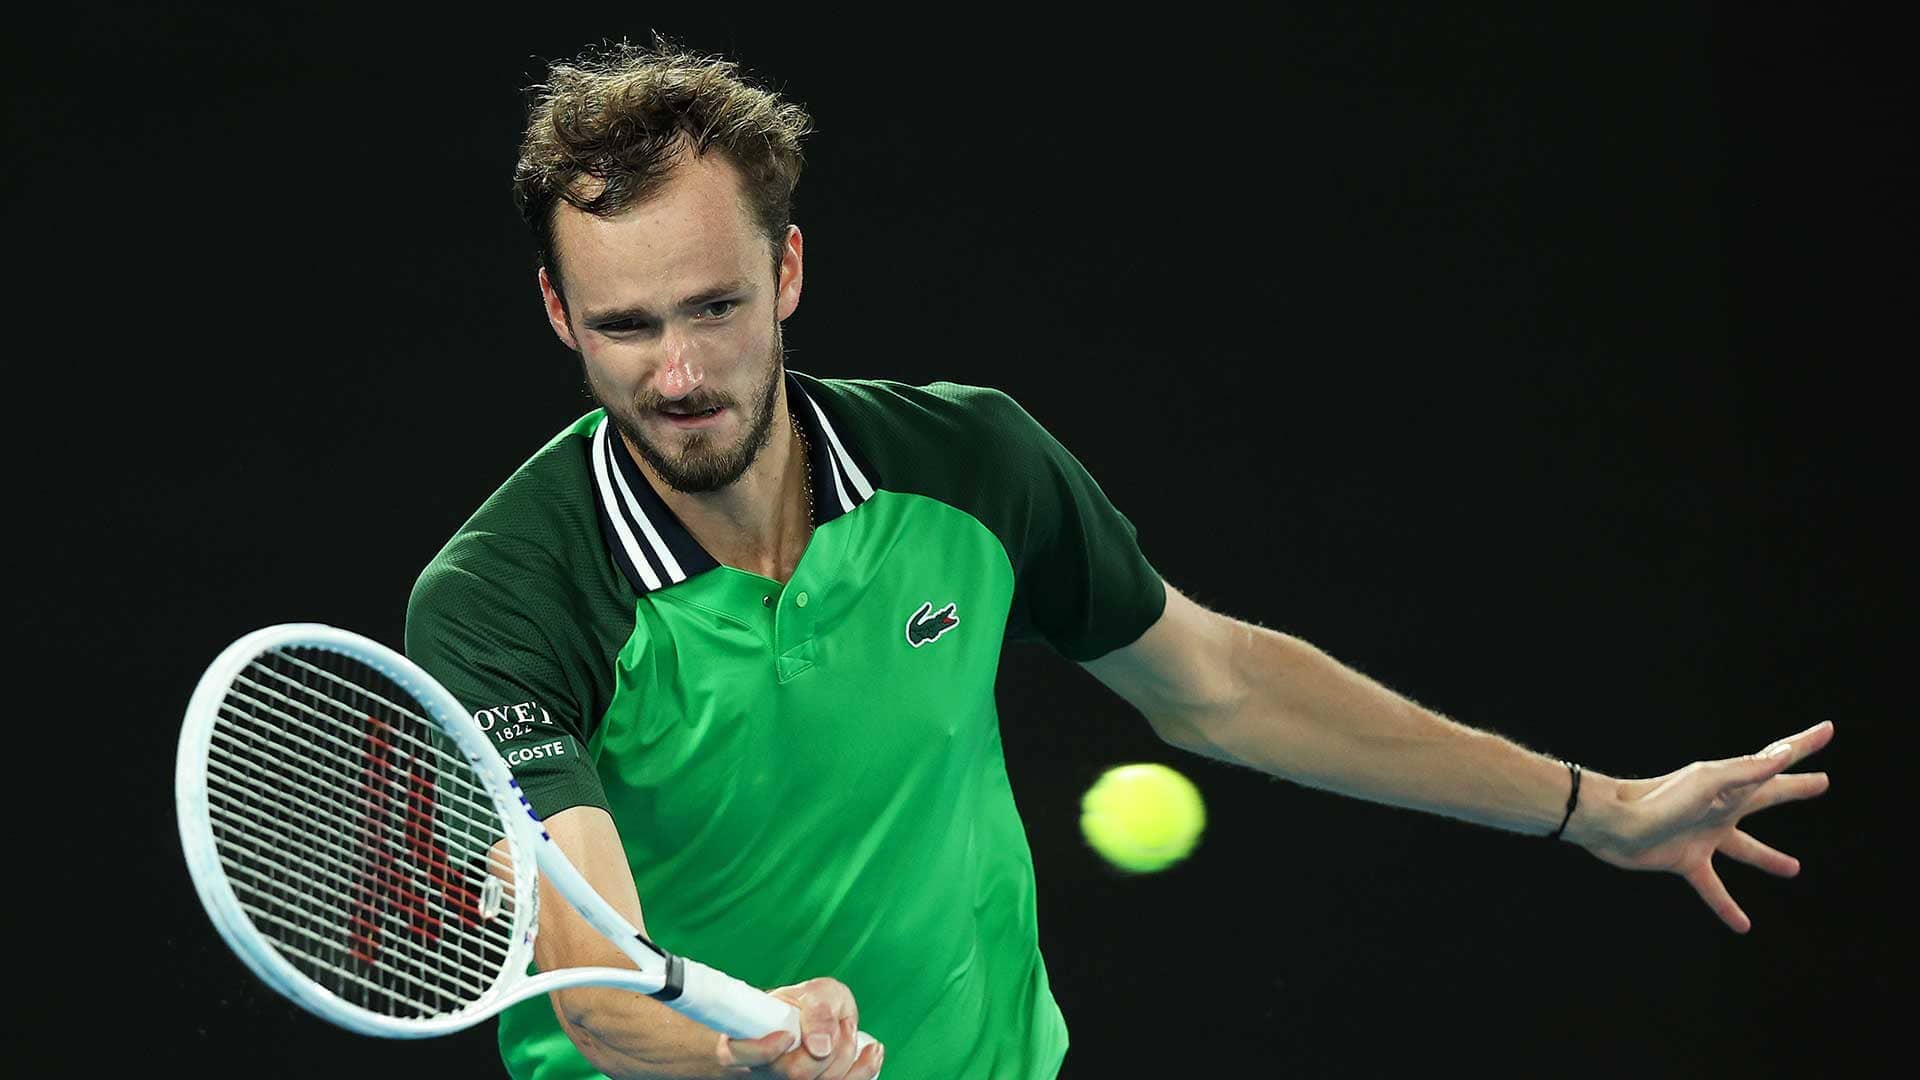 Daniil Medvedev will make his second appearance at the Laver Cup.